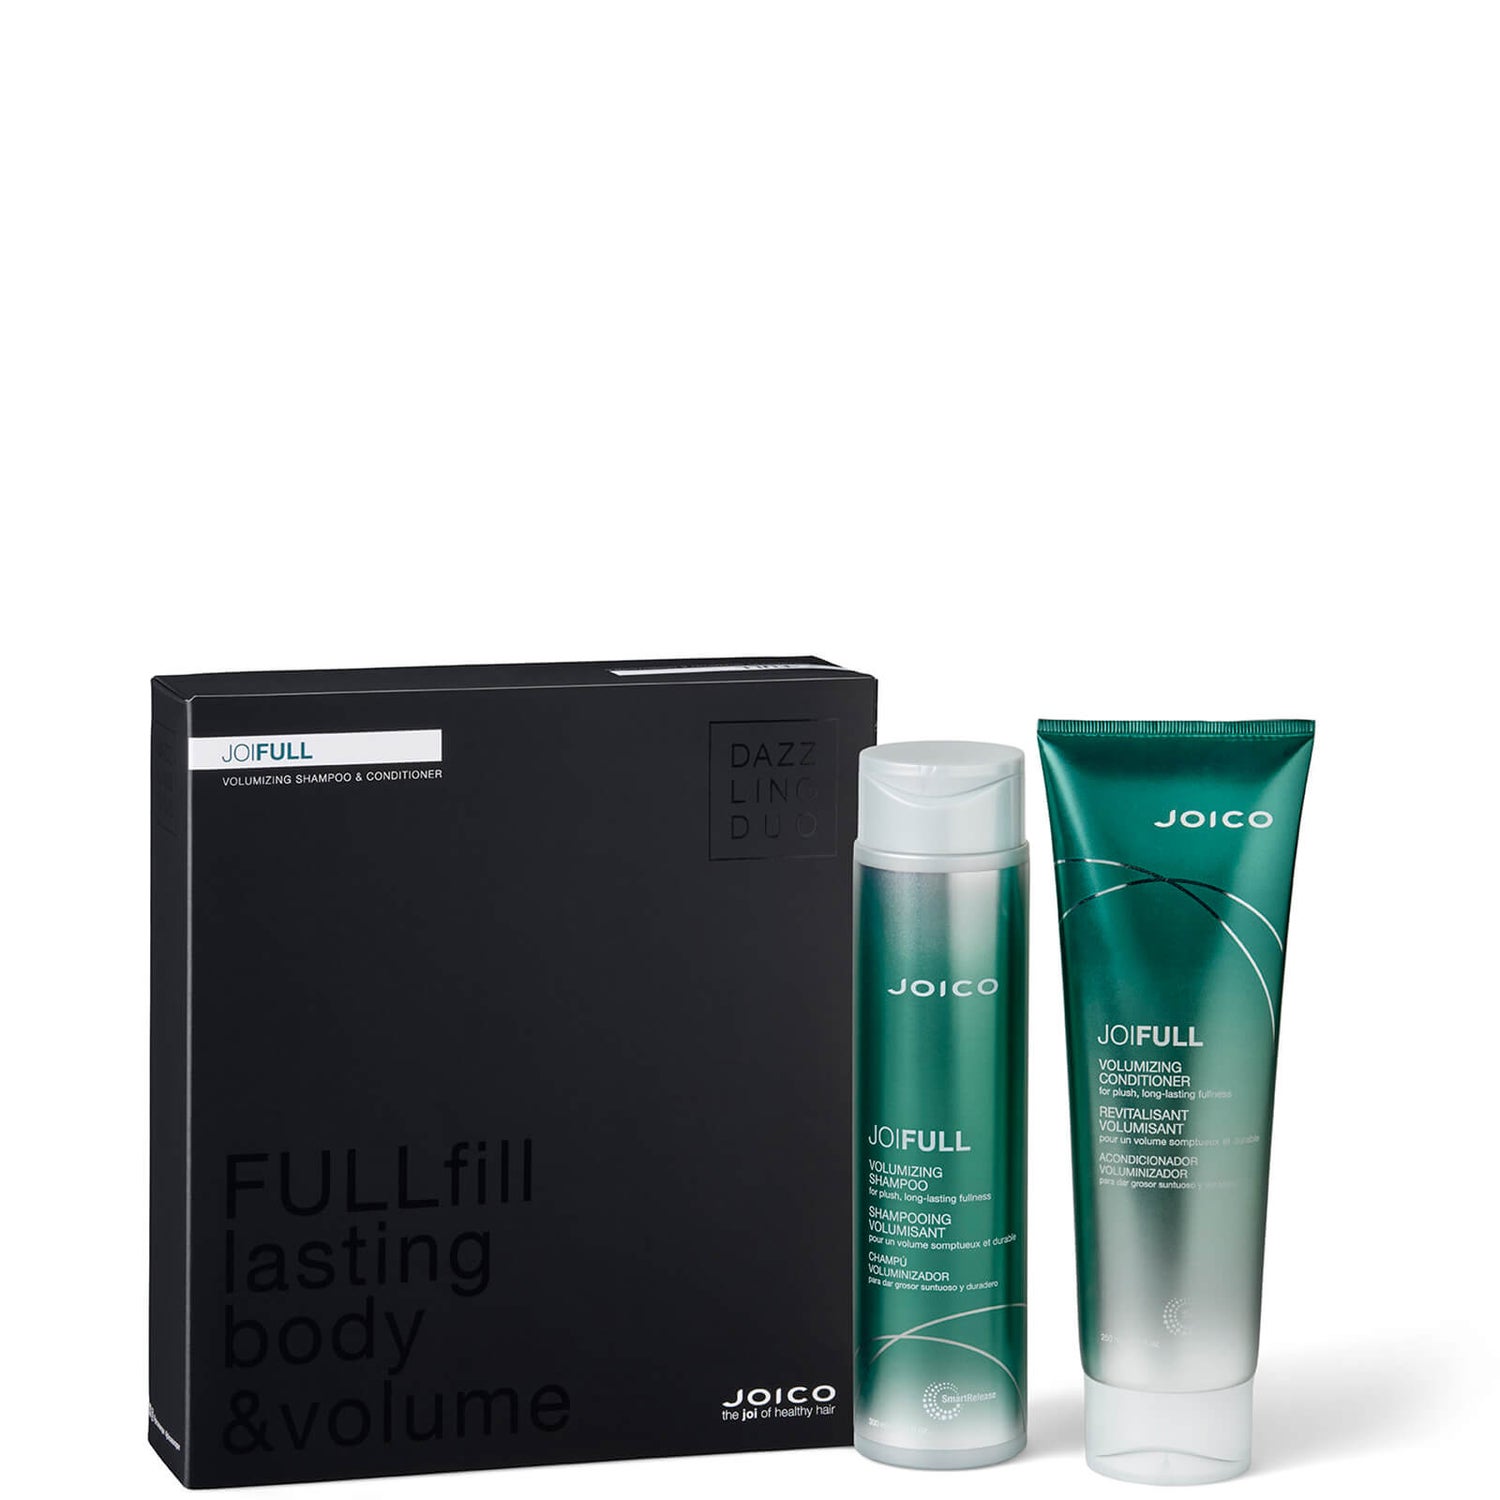 JOICO JoiFull Shampoo and Conditioner Dazzling Duo